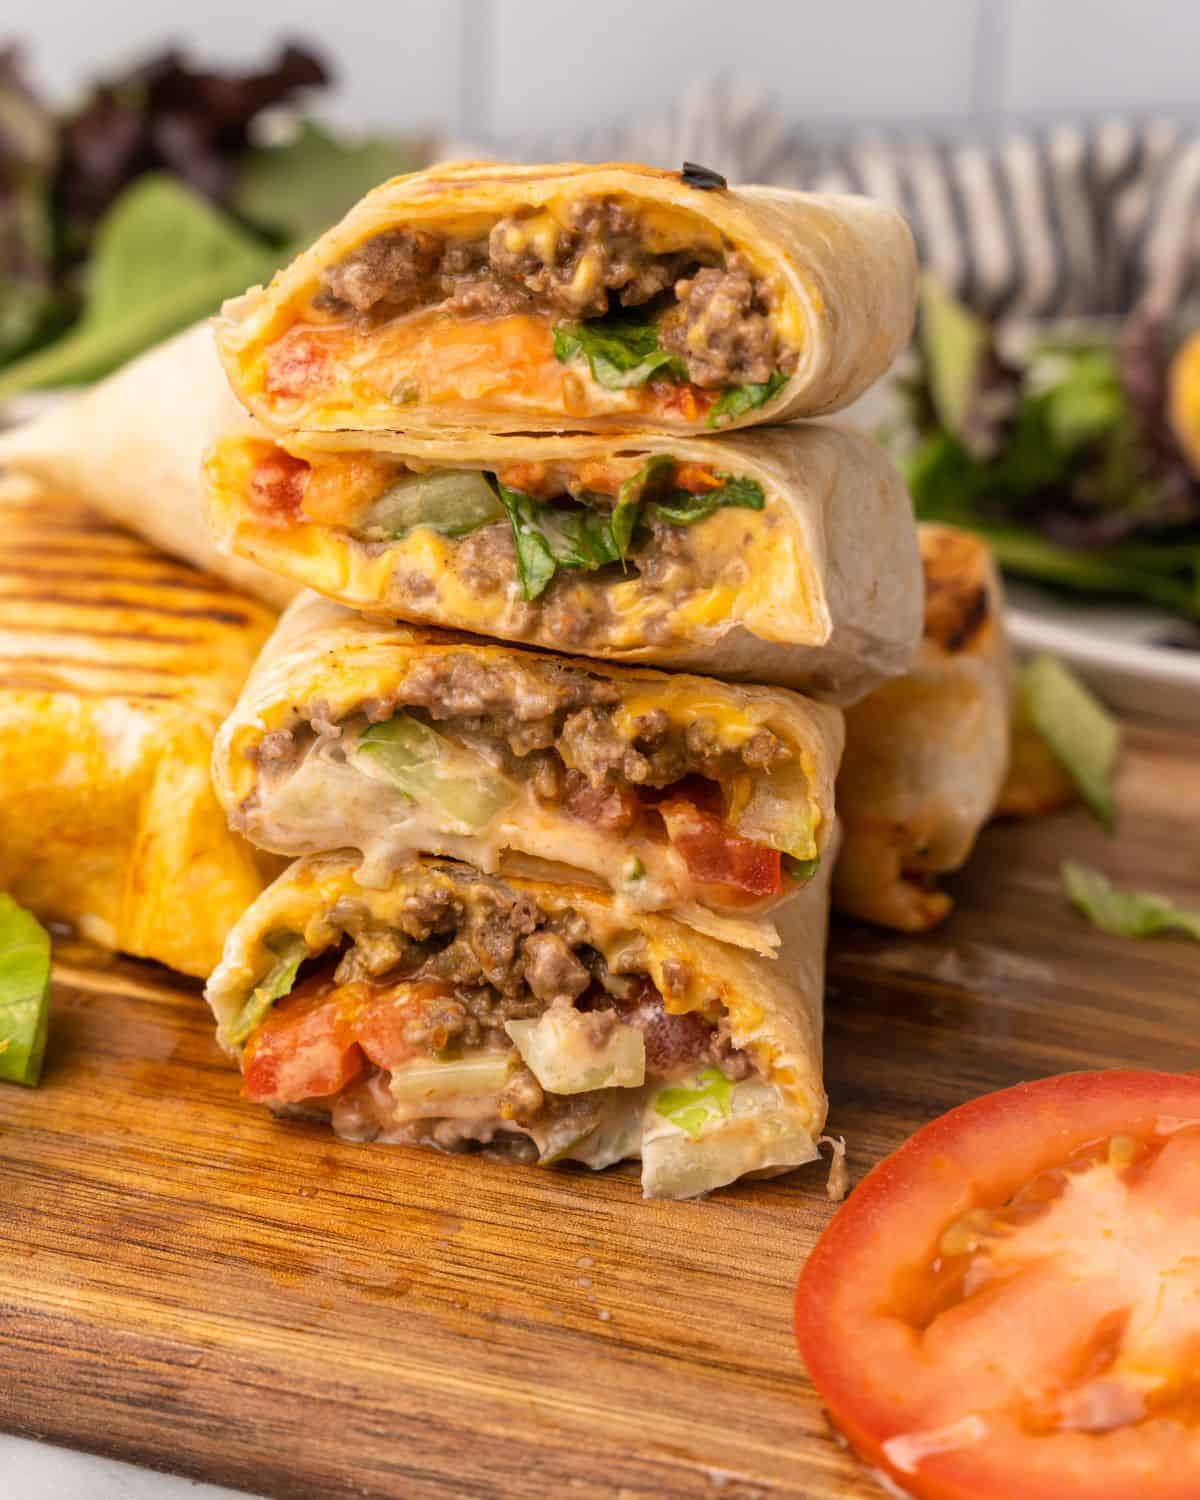 ground beef burger wraps stacked on cutting board.